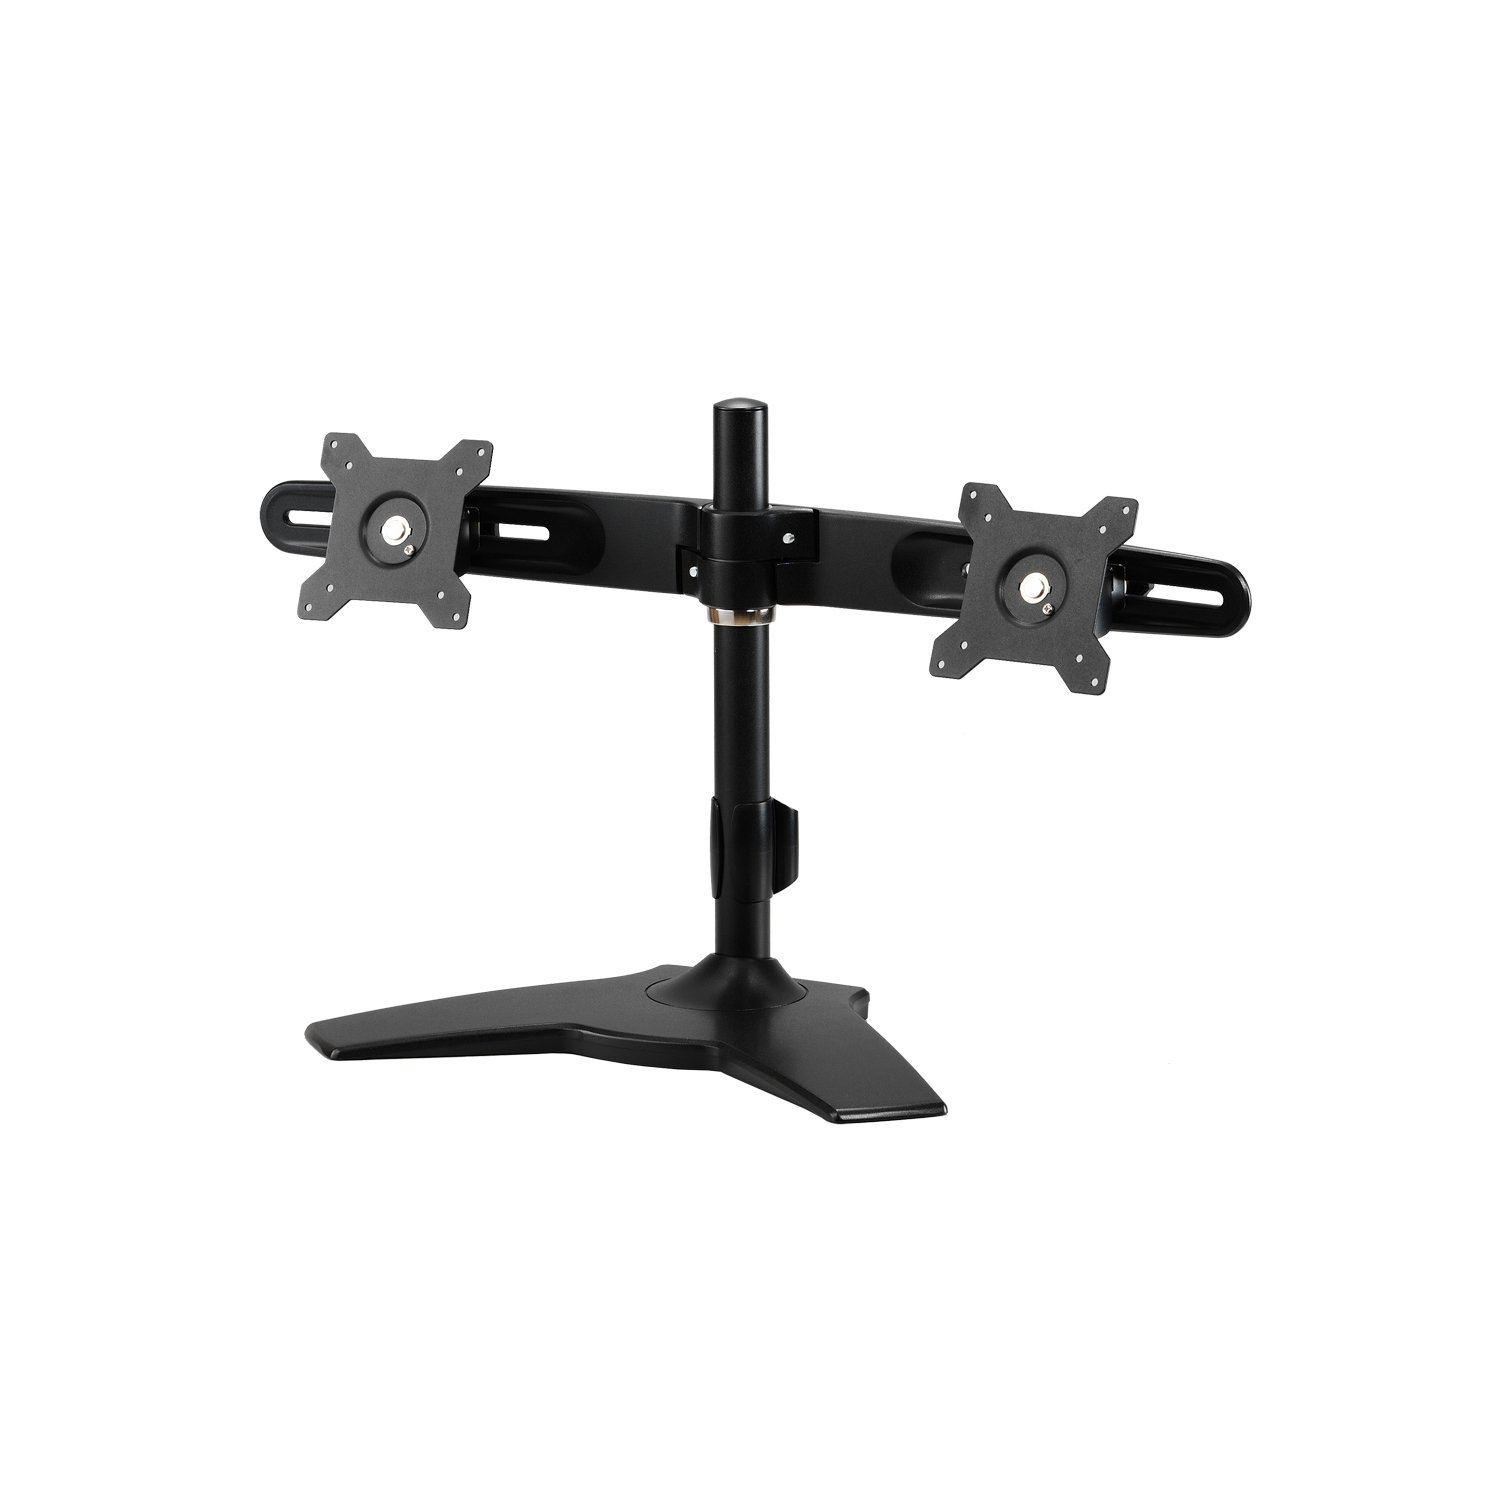 Amer Mounts 2EZSTAND - stand - articulating dual arms - for 2